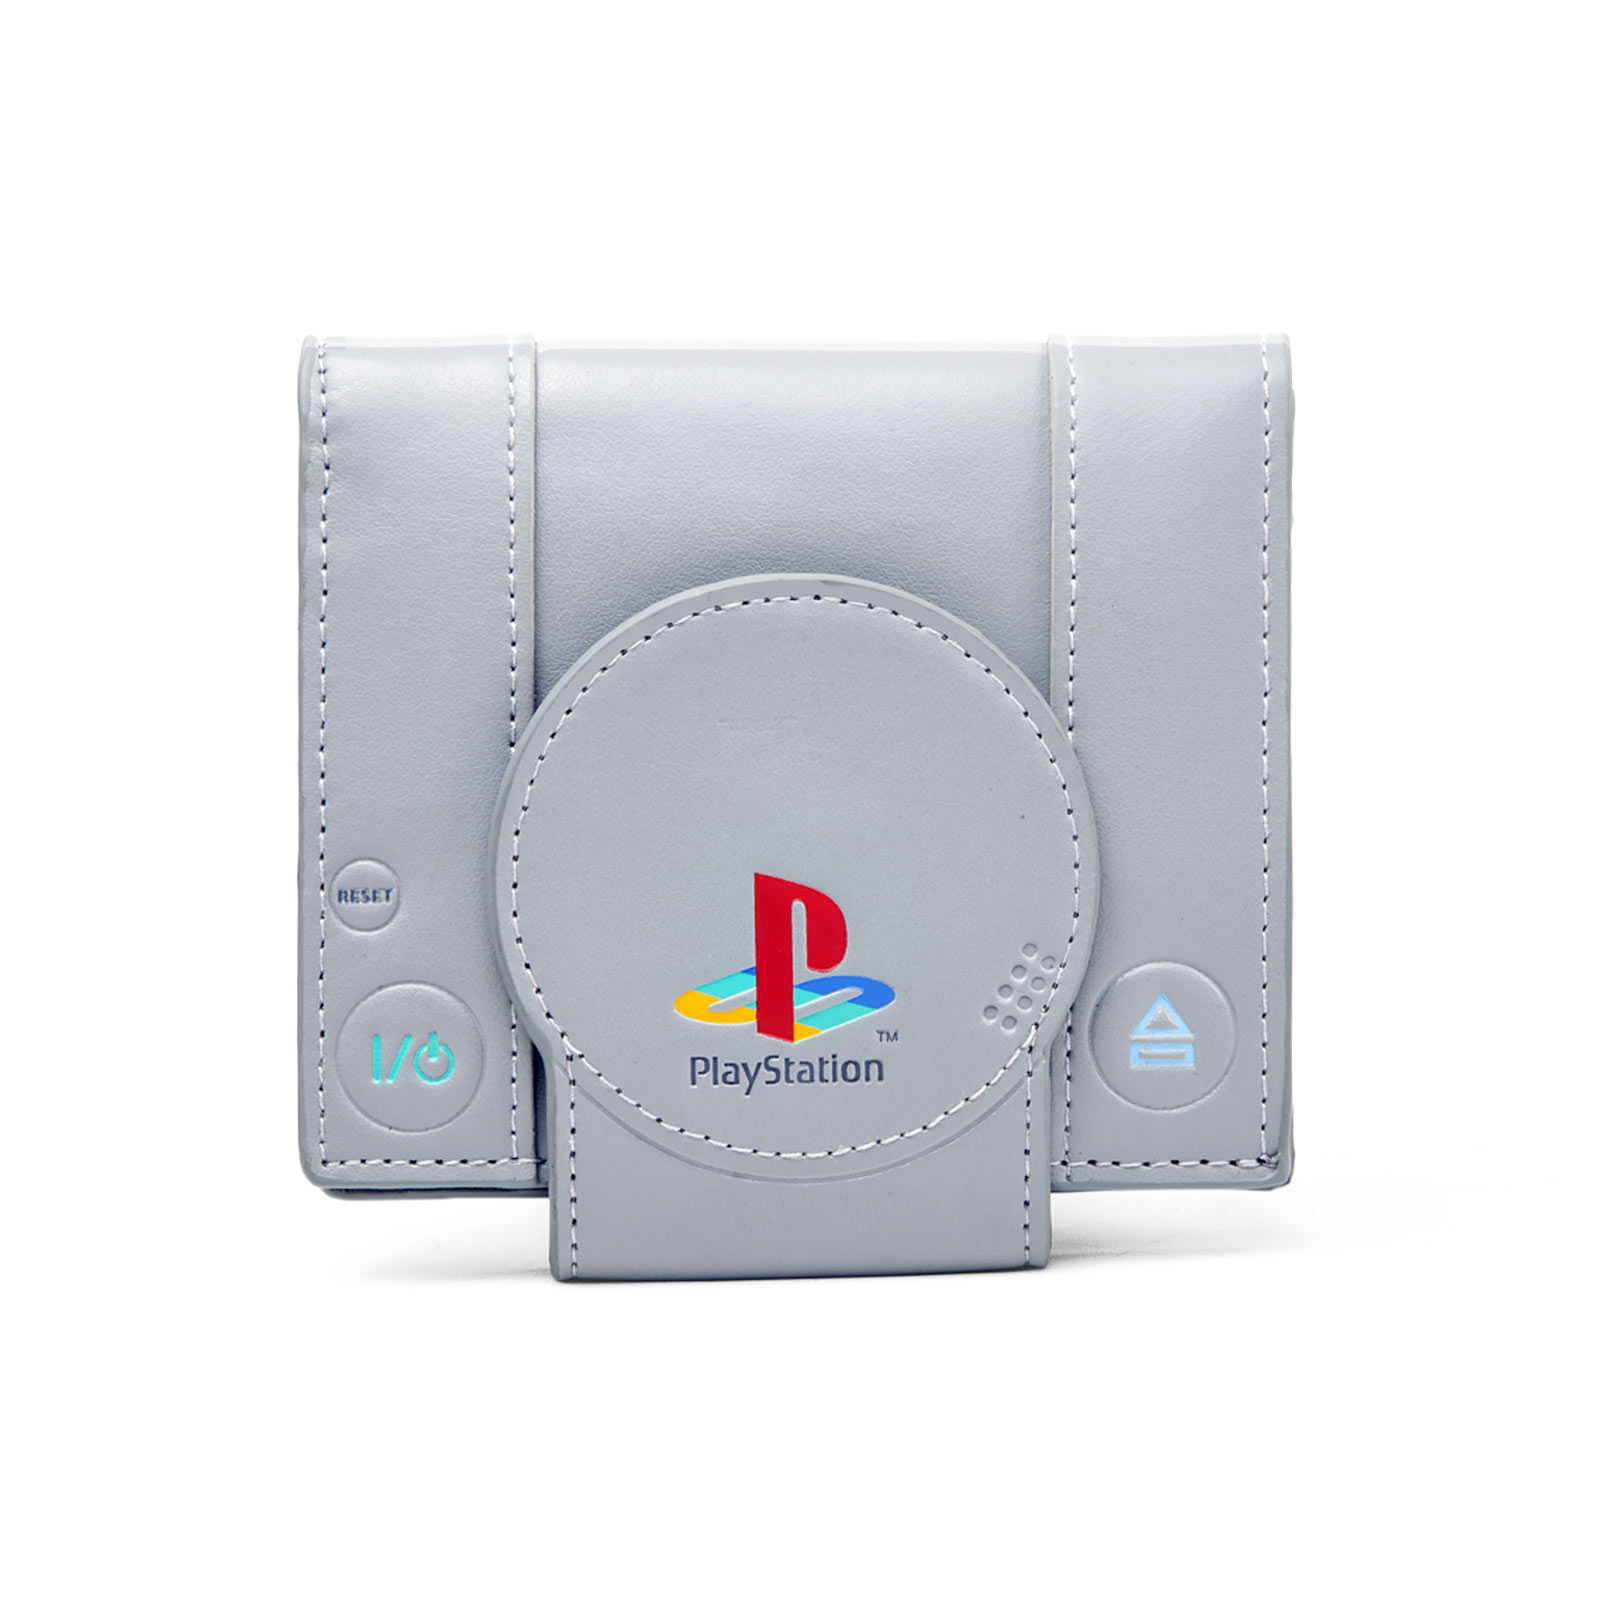 PlayStation - Portefeuille